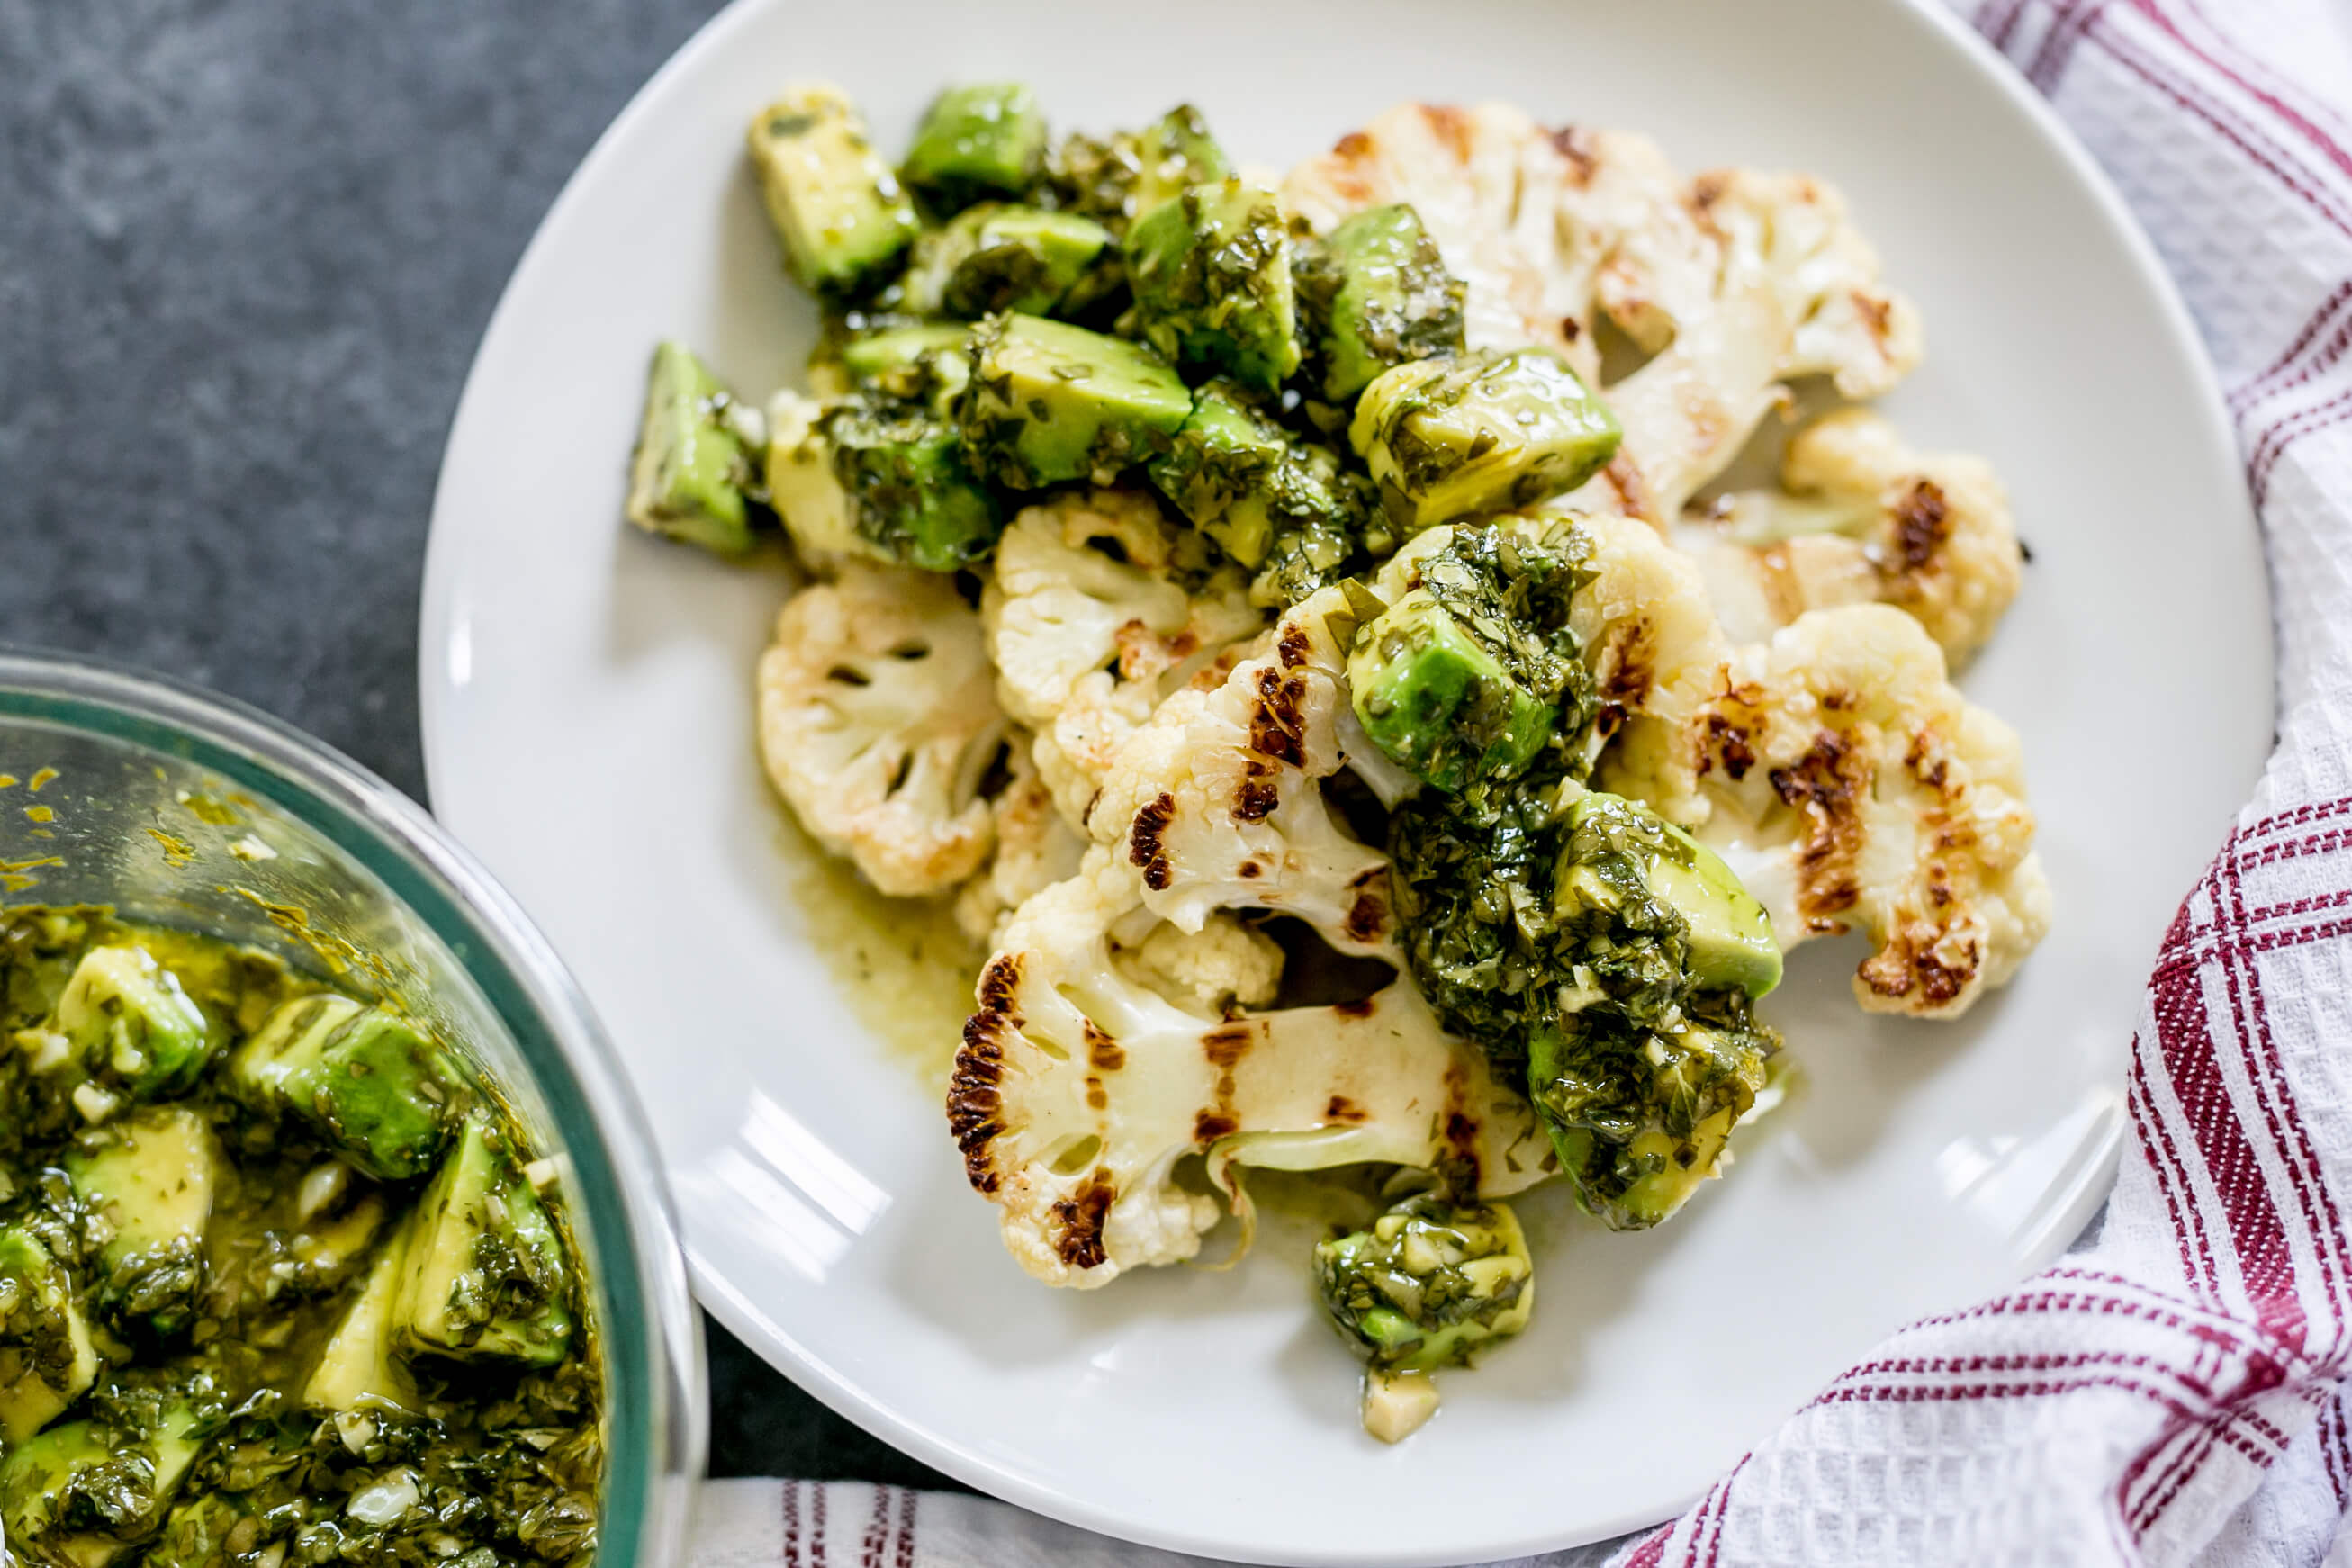 20 Meal Ideas Your Clients Can Grill This Summer: Grilled Cauliflower Steaks with Avocado Chimichurri